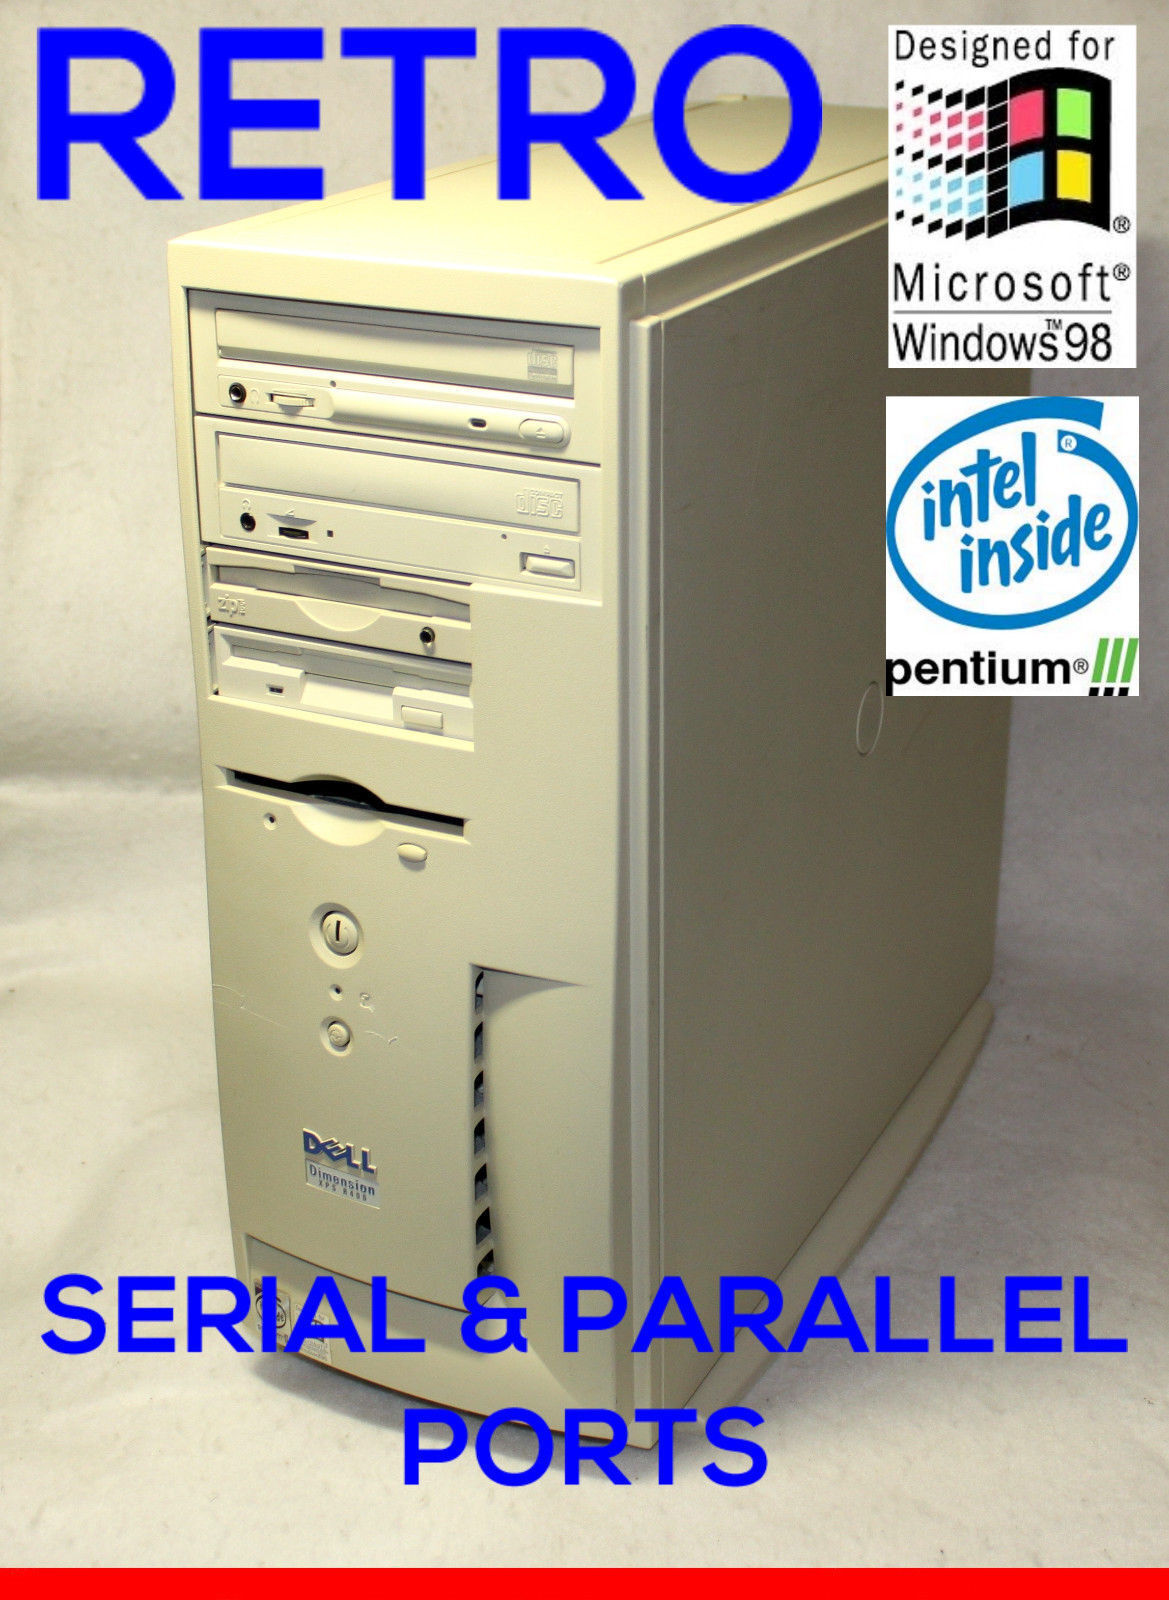 Dell Business Industrial Pentium 3 Computer Win95 98 Windows 98 MS-DOS CNC 